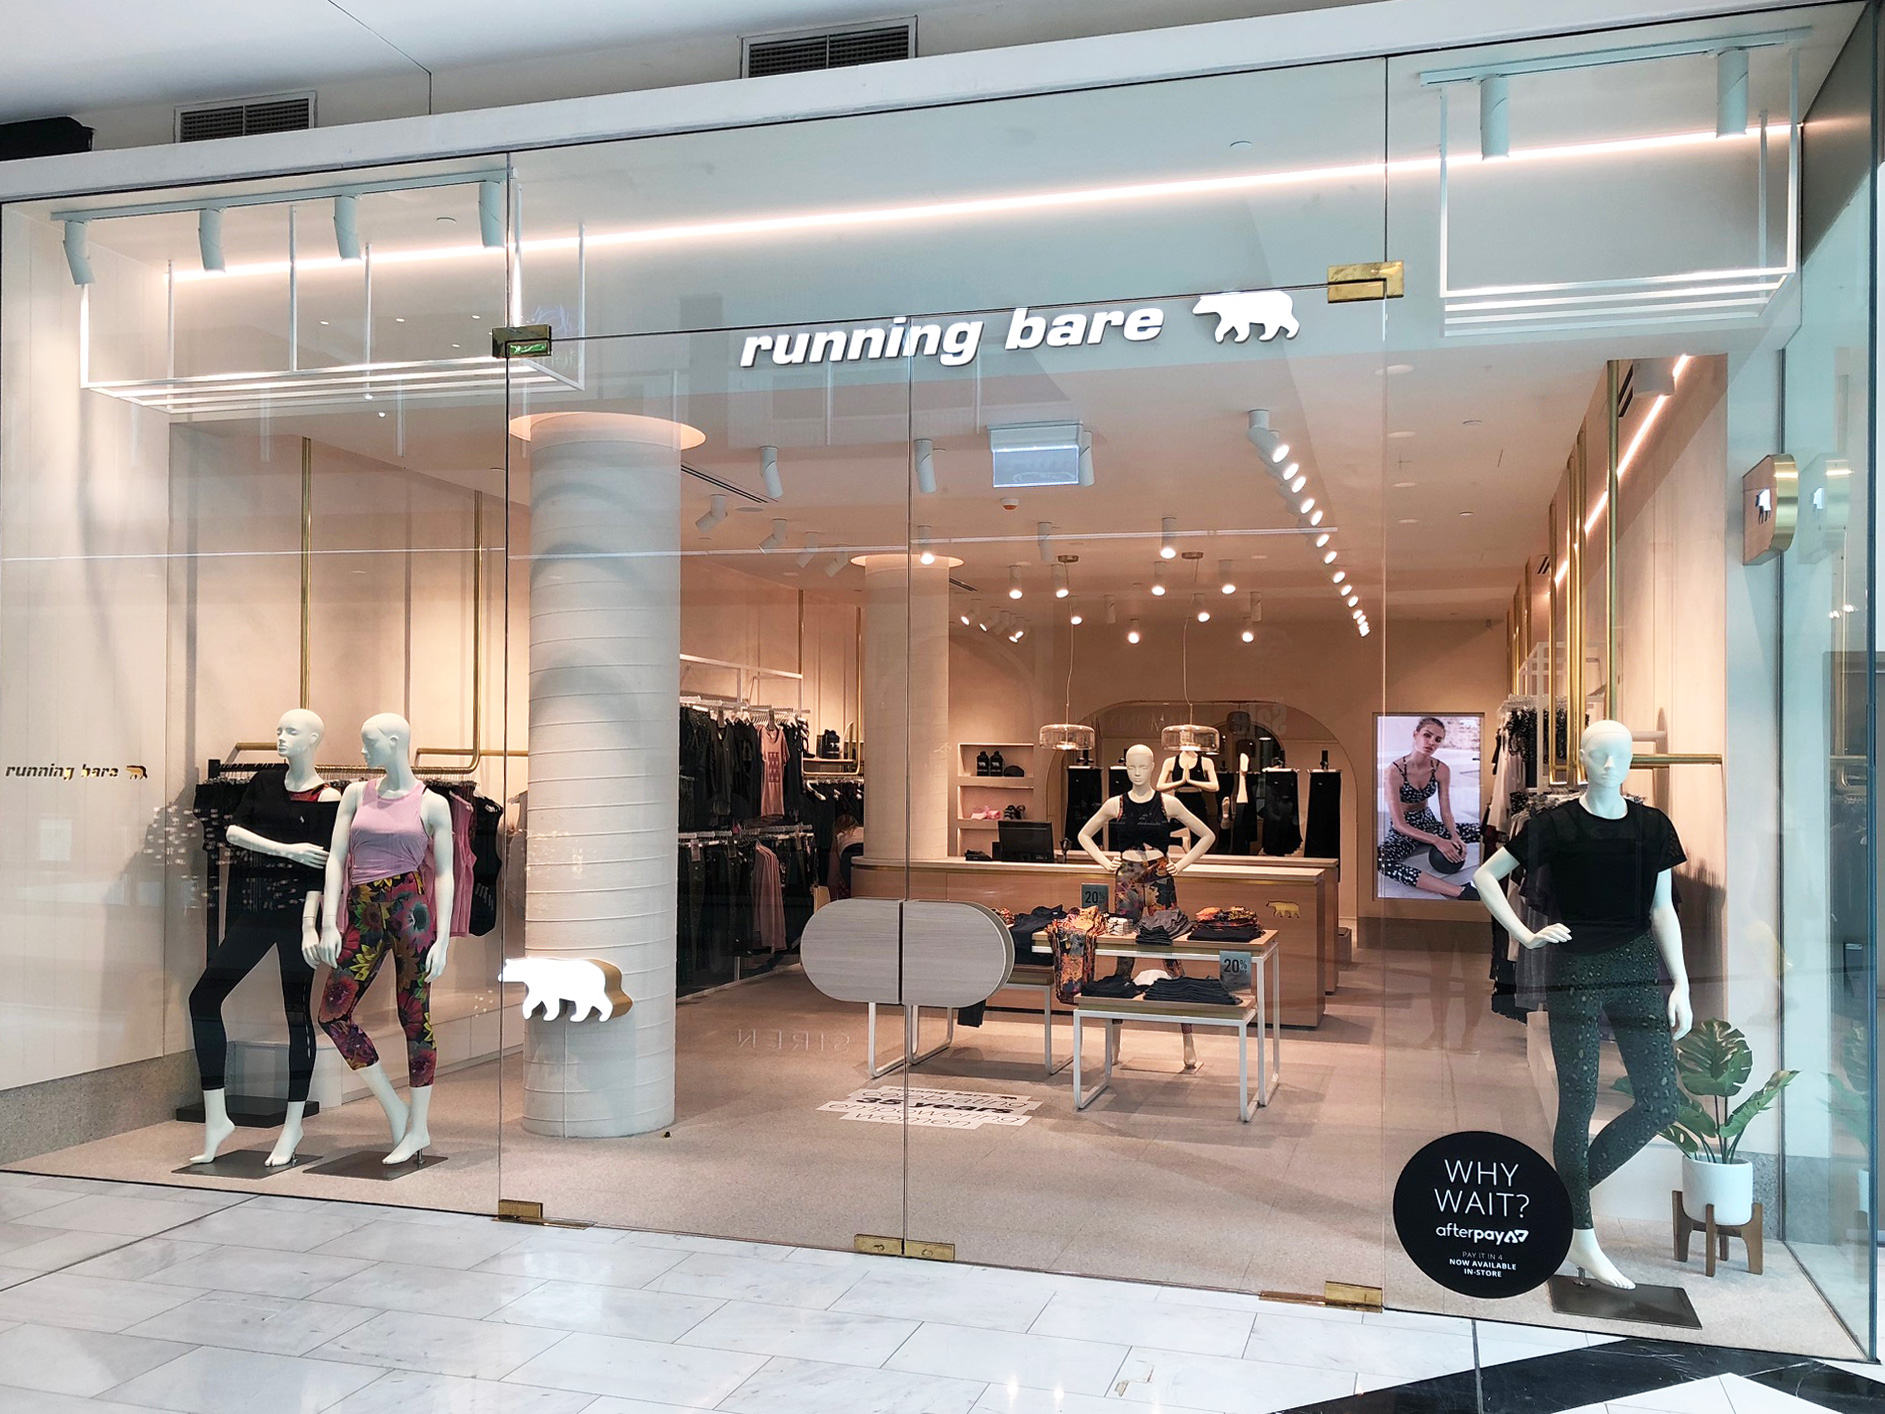 https://designclarity.net/files/design-clarity_running-bare-now-opened-at-westfield-chatswood_tqpzwpbh9z.jpg